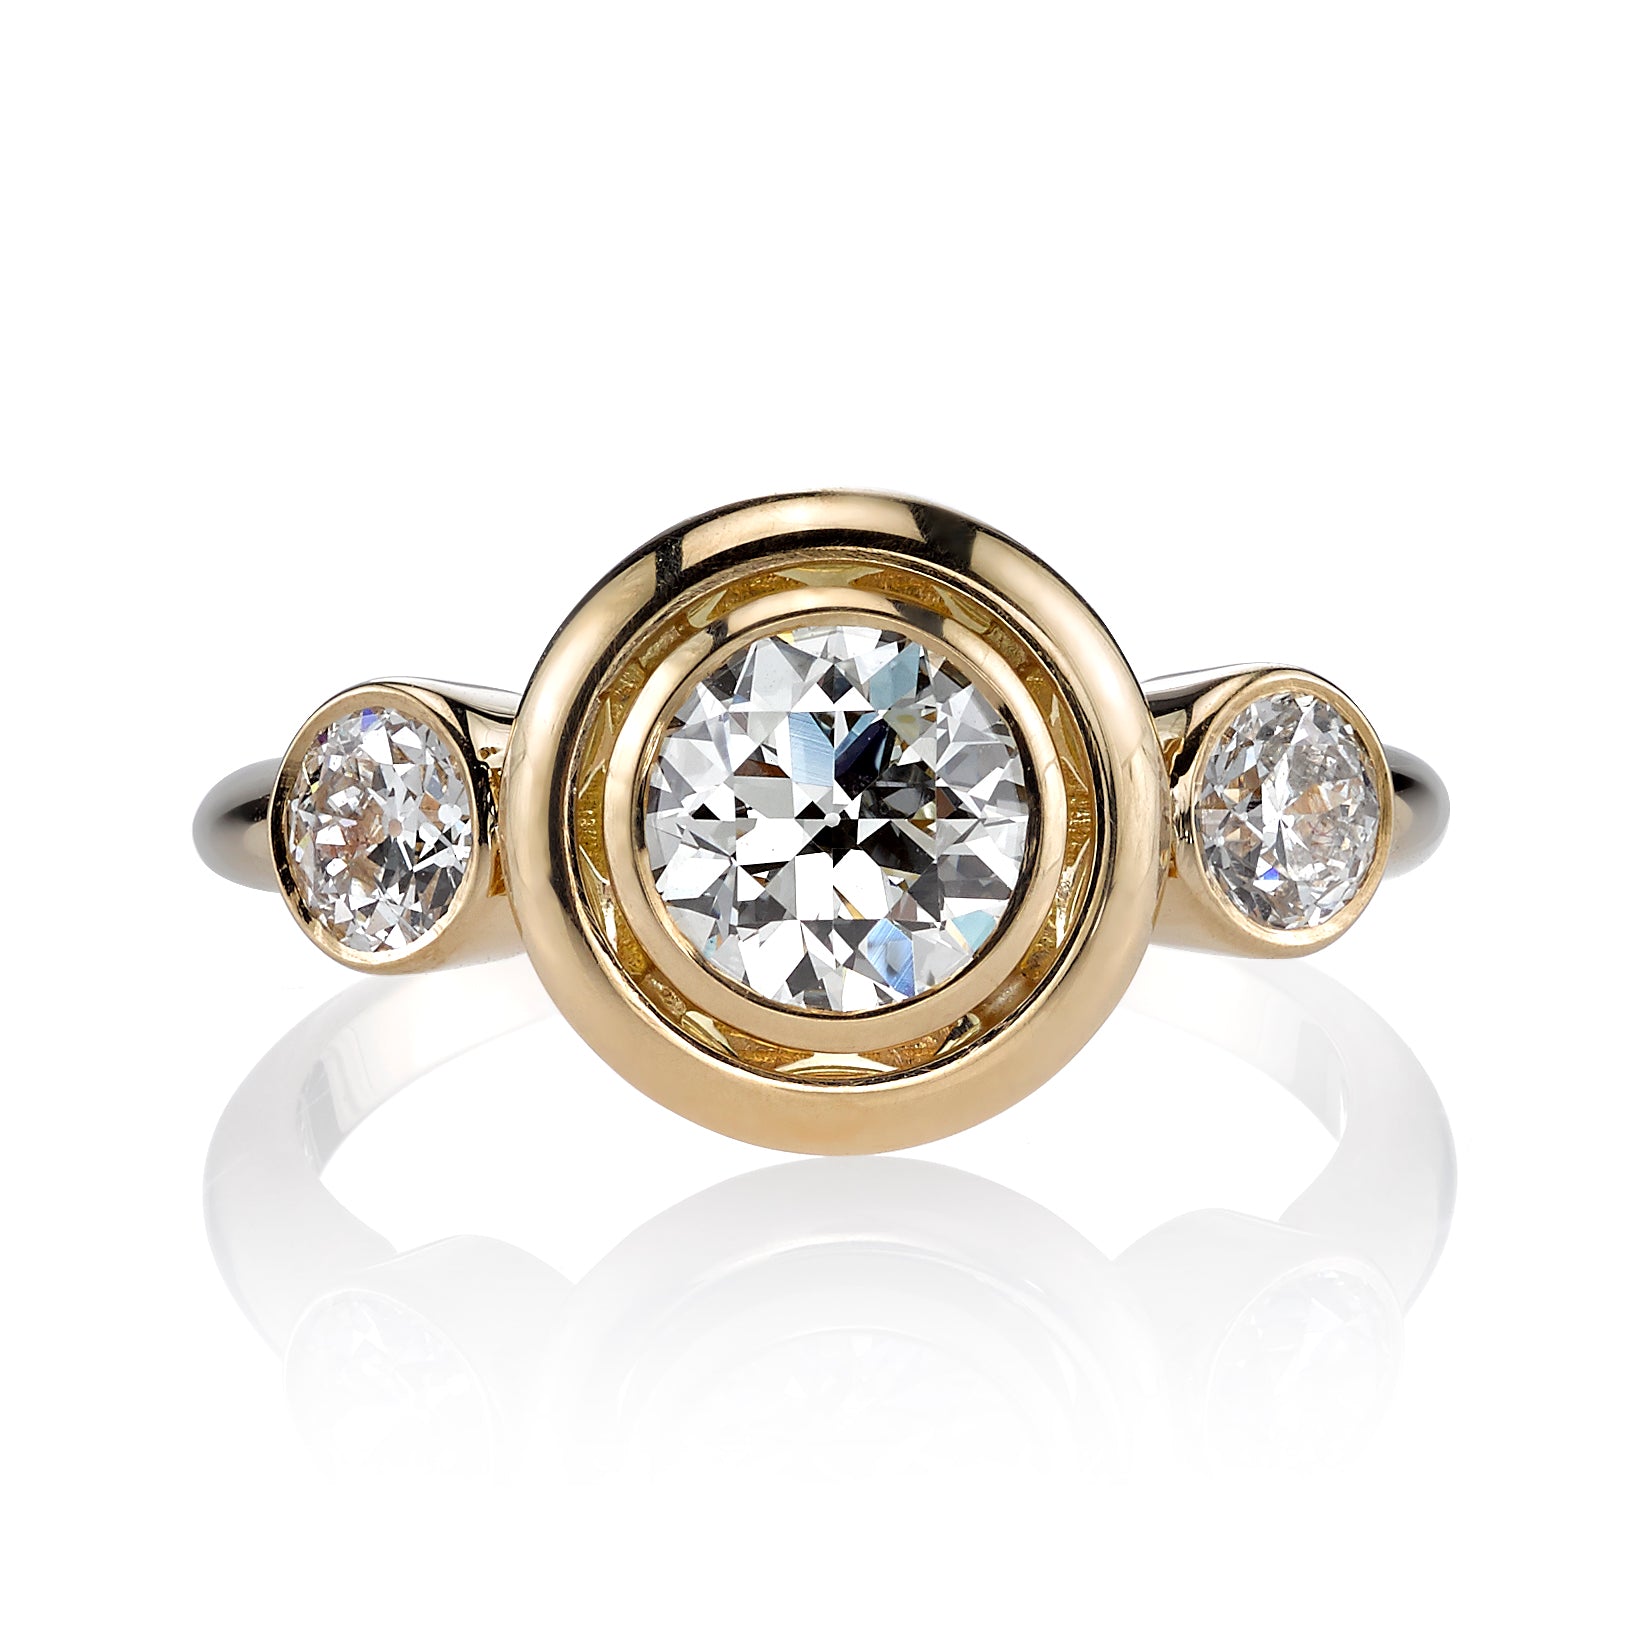 SINGLE STONE WAVERLY RING featuring 0.92ct J/VS1 EGL certified old European cut diamond with 0.50ctw old European cut accent diamonds set in a handcrafted 18K yellow gold mounting.